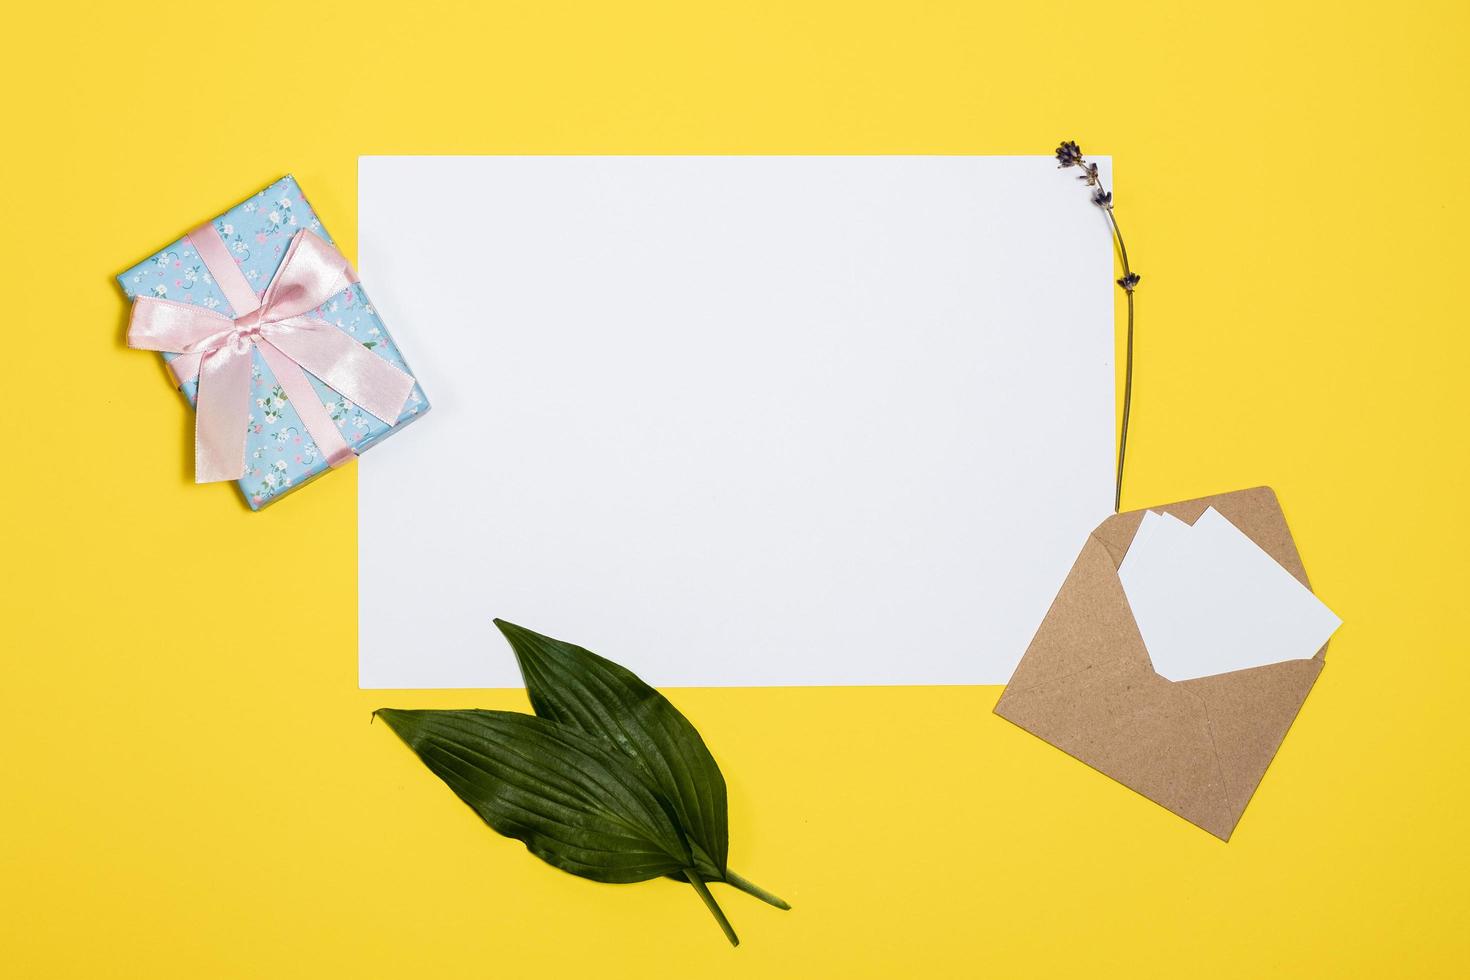 white sheets, envelope, gift box  lie  on a yellow background photo